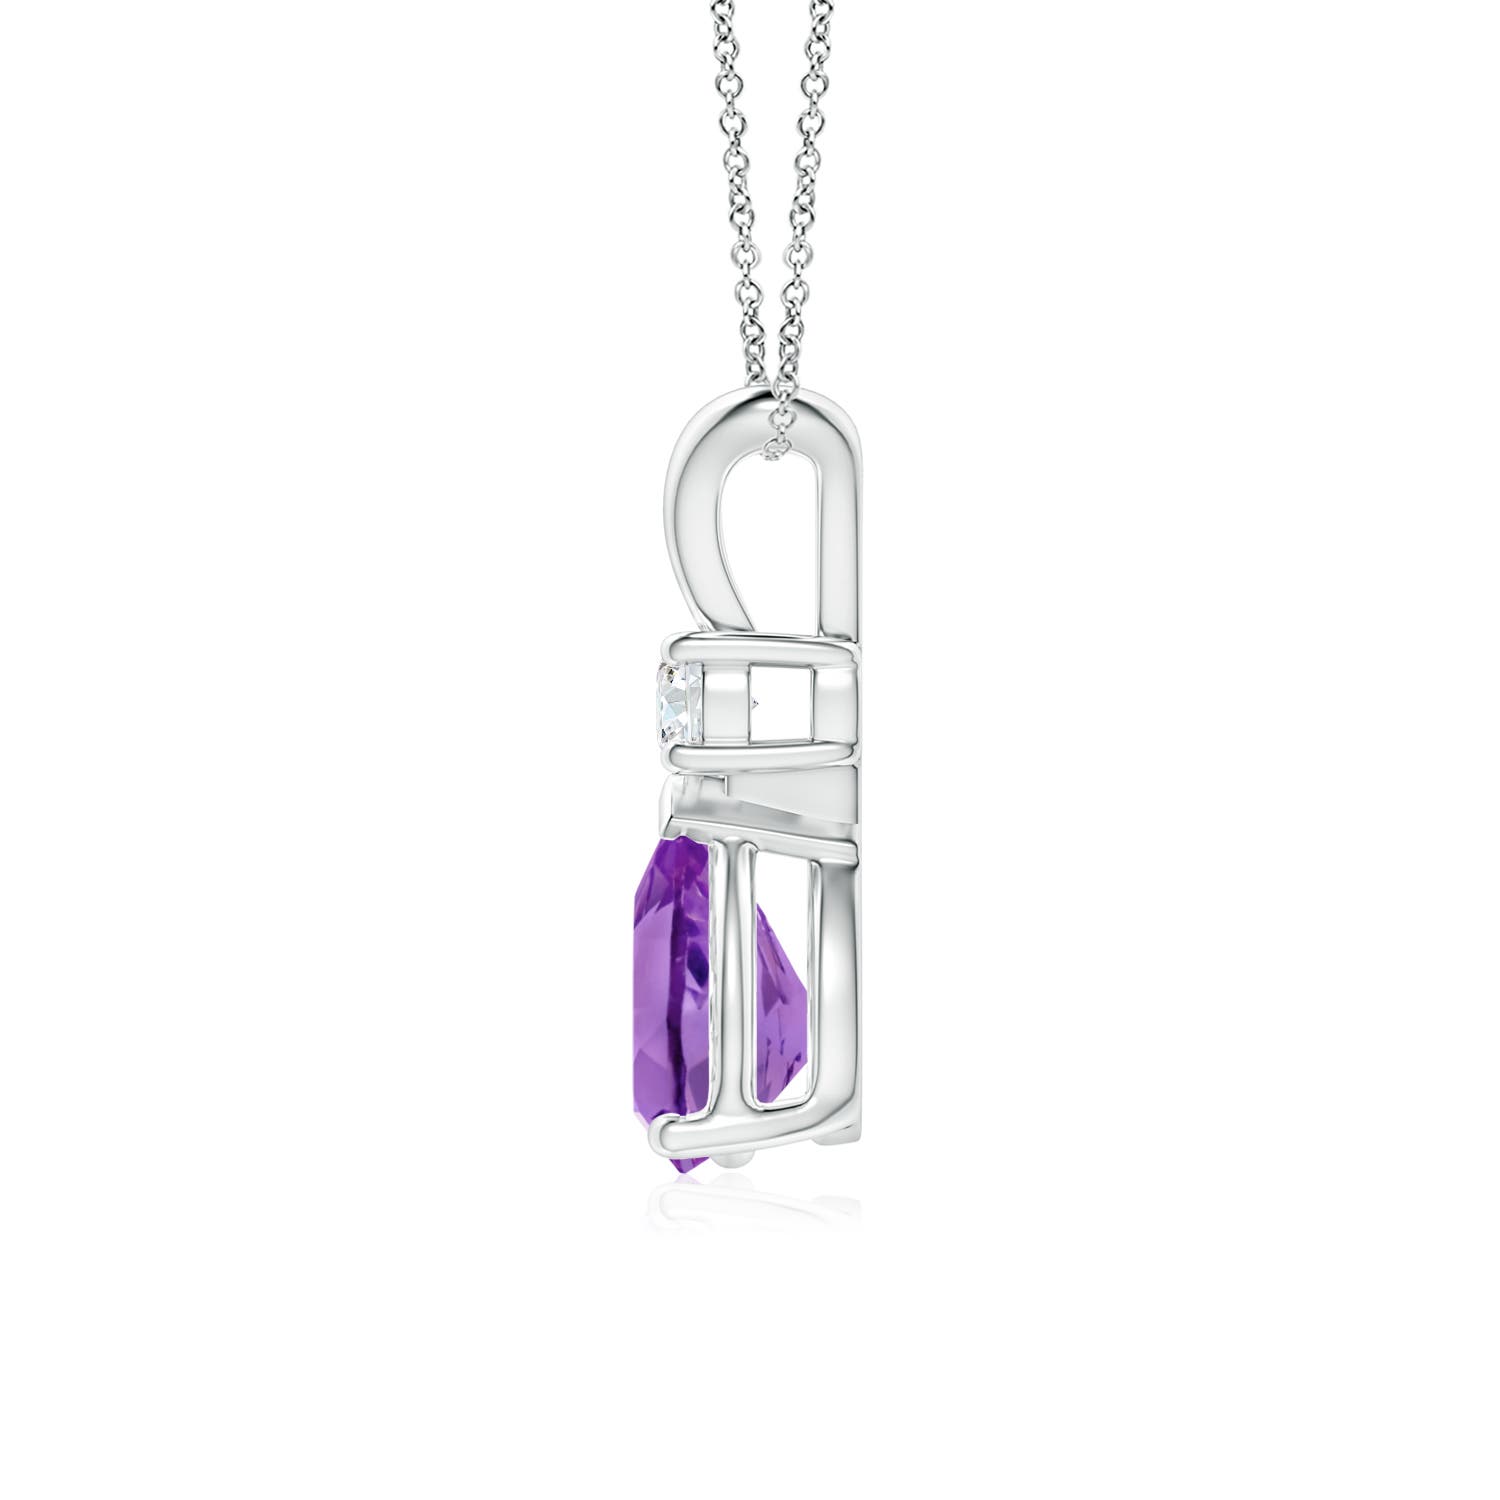 AA - Amethyst / 1.11 CT / 14 KT White Gold